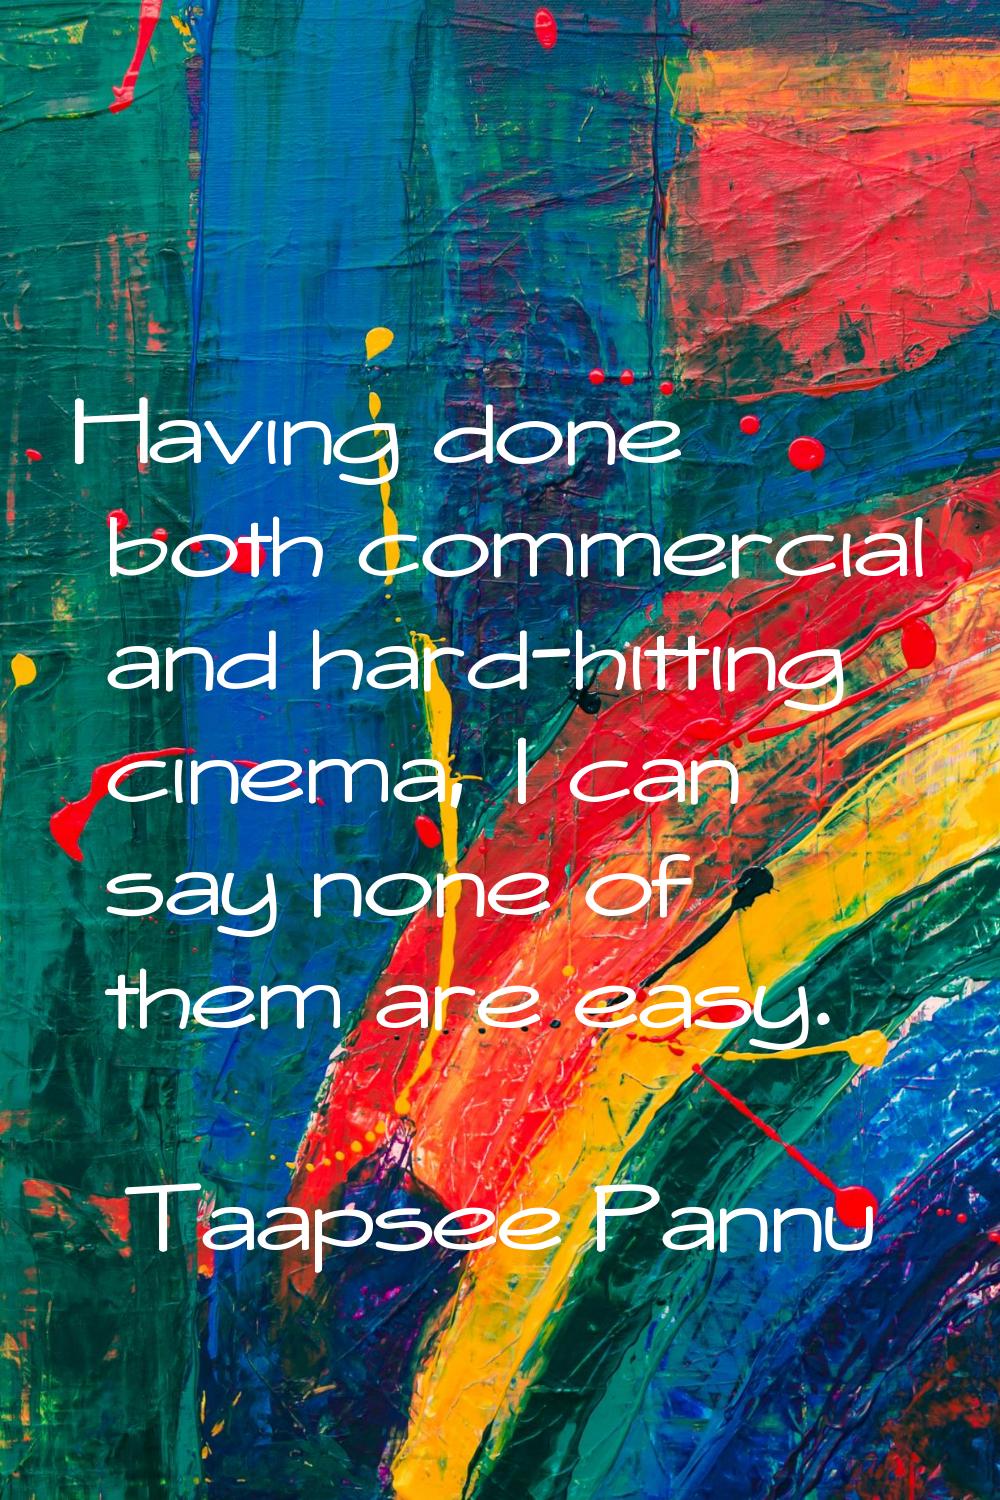 Having done both commercial and hard-hitting cinema, I can say none of them are easy.